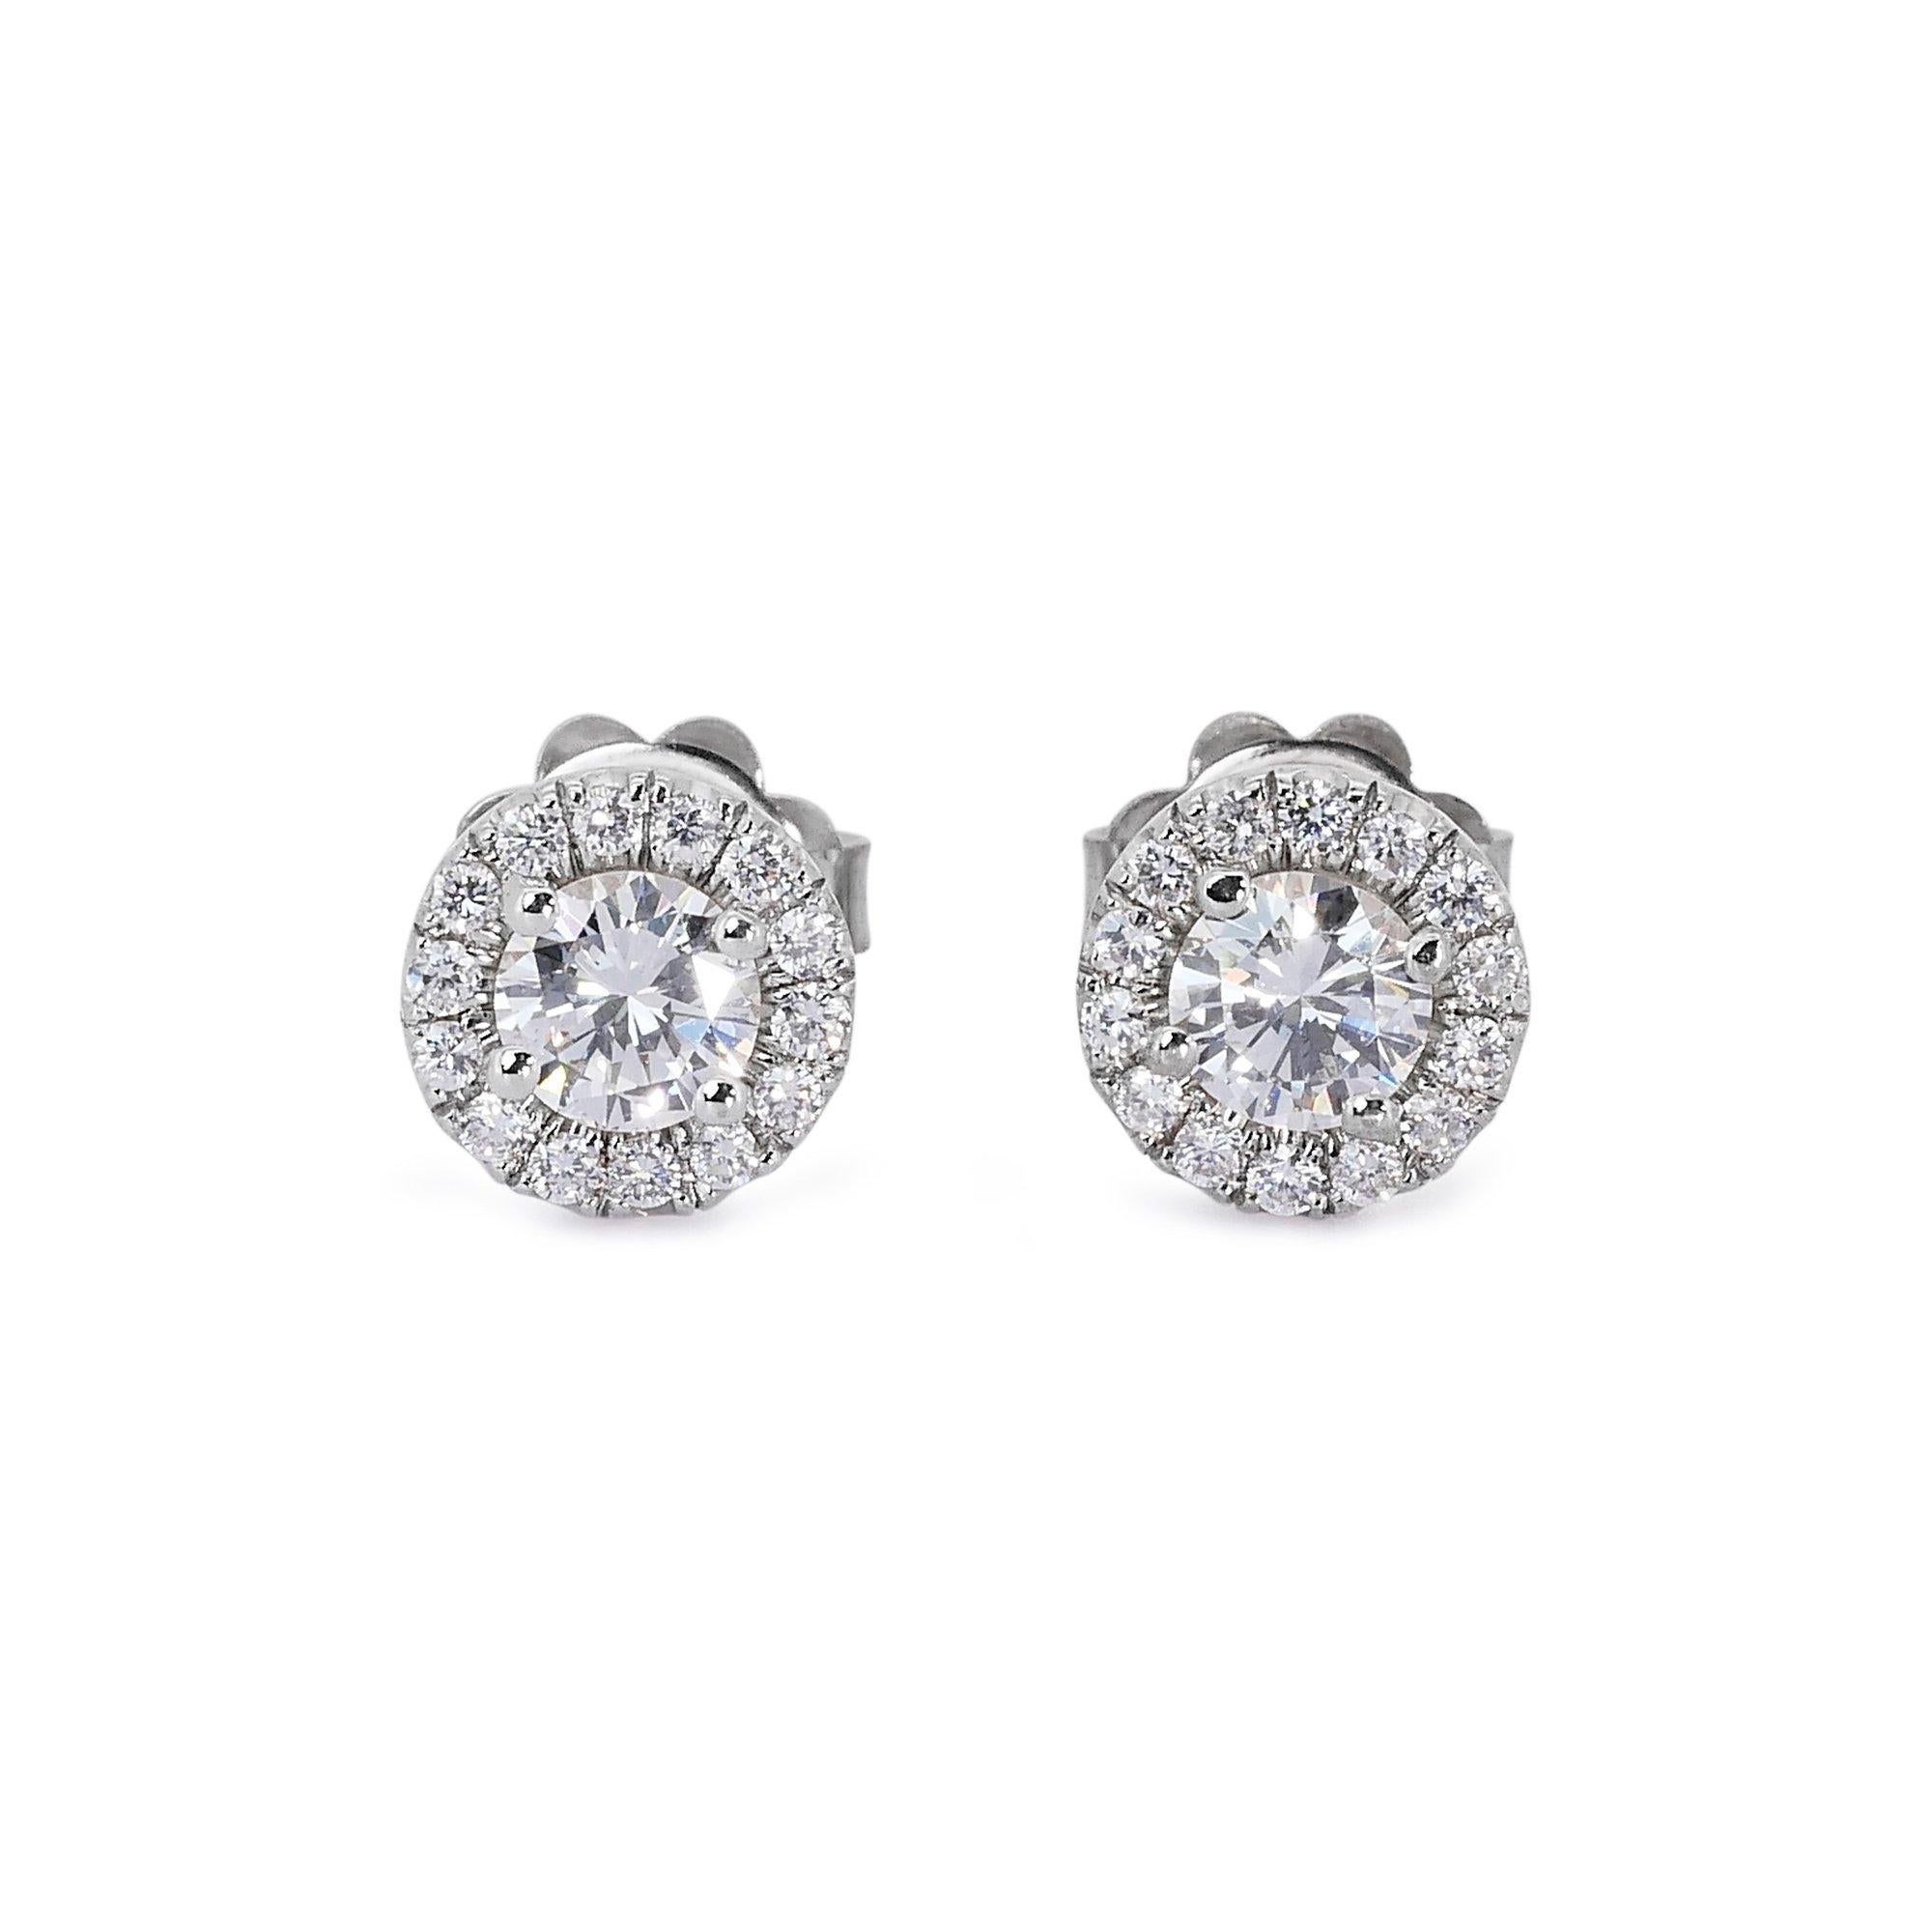 Luxurious 1.24ct Round Diamond Stud Earrings in 18K White Gold - GIA Certified For Sale 4